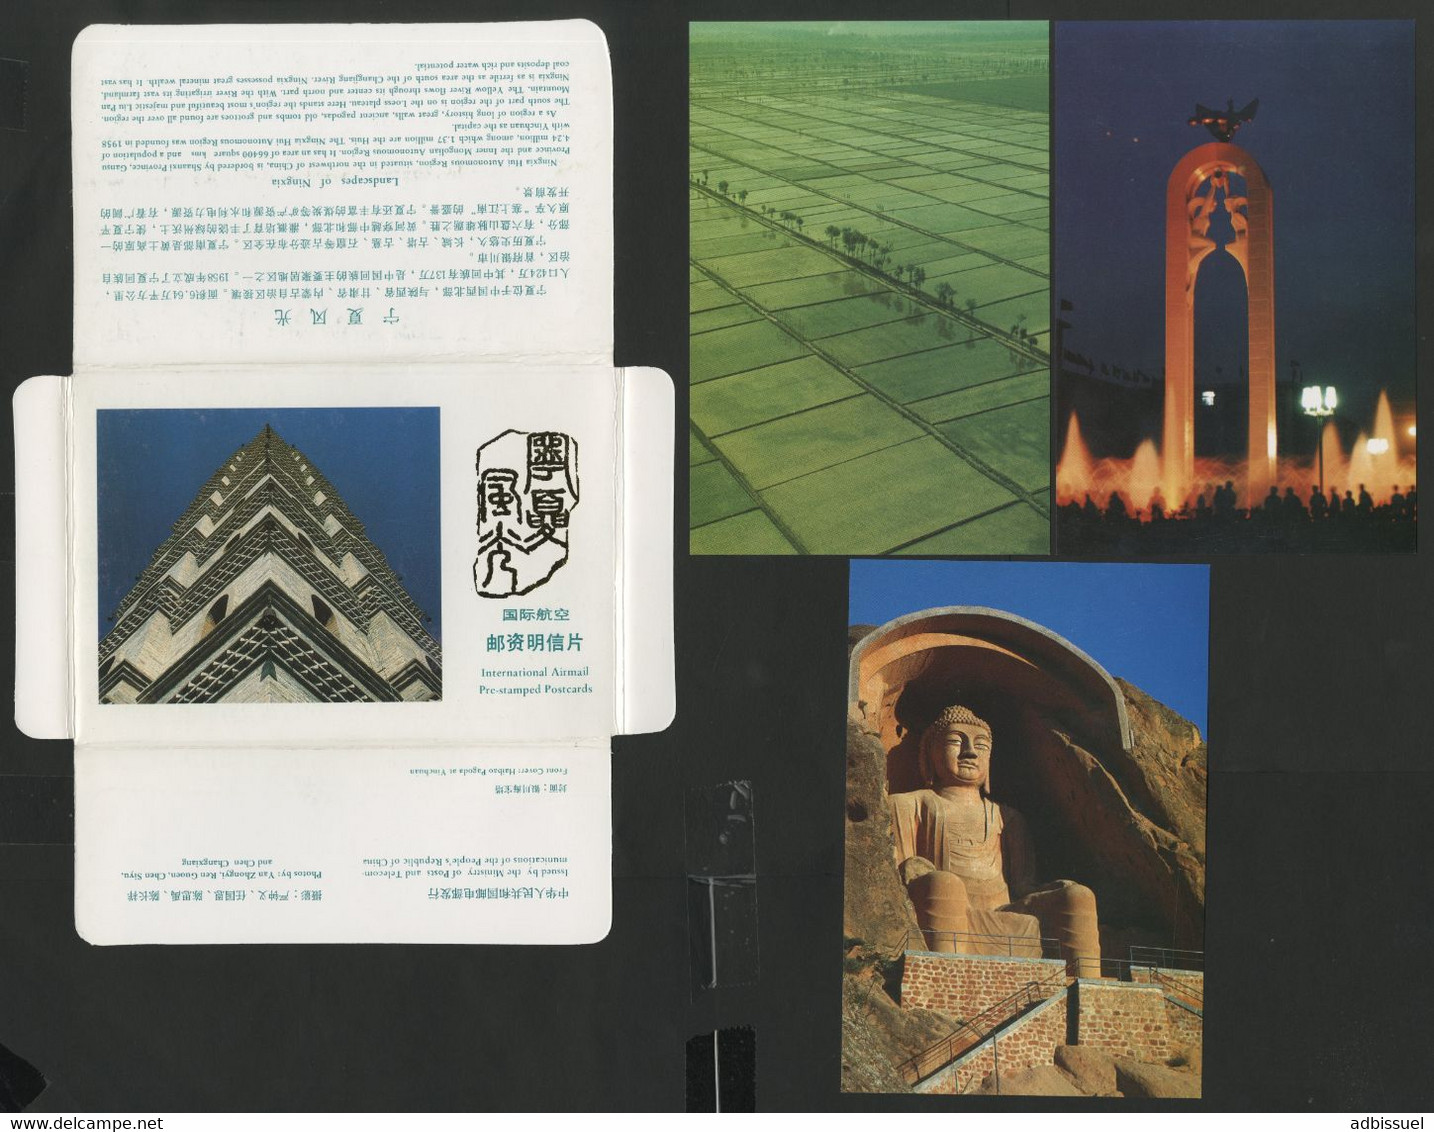 CHINA CHINE Set Of 10 AIR MAIL Postal Stationery Landscape Of NINGXIA Very Fine With Cardboard Sleeve. - Cartes Postales